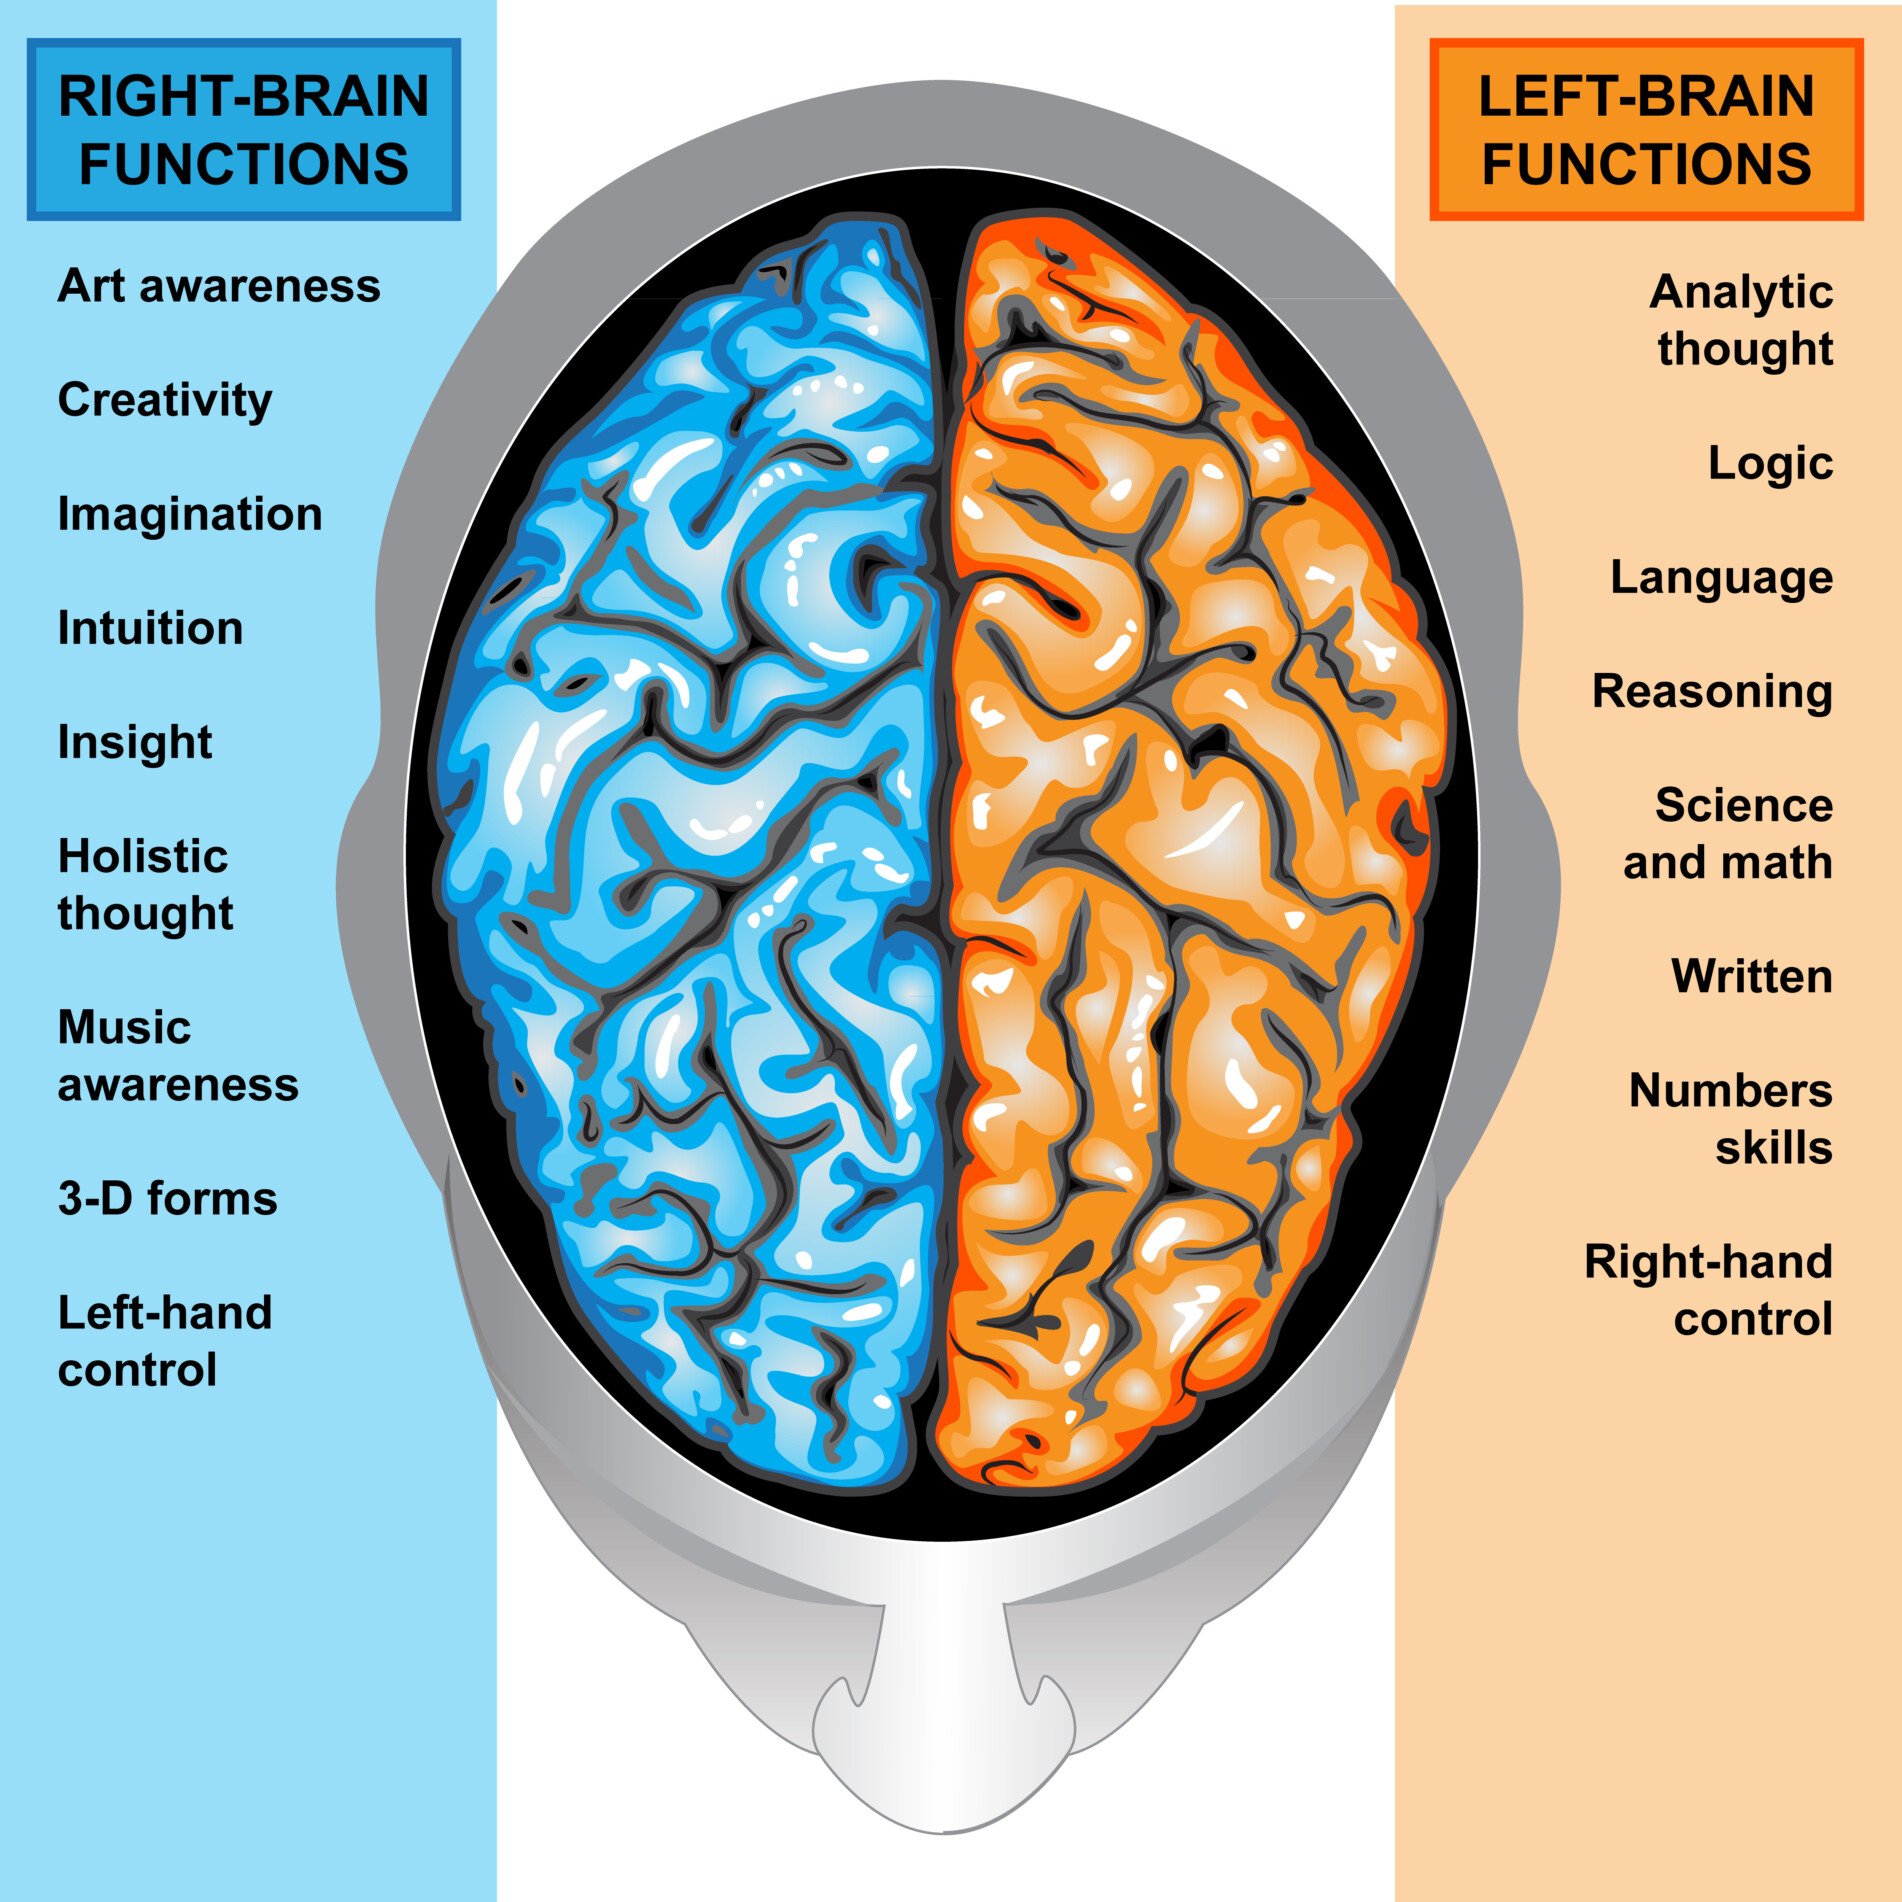 image of the hemispheres of the brain and their functions